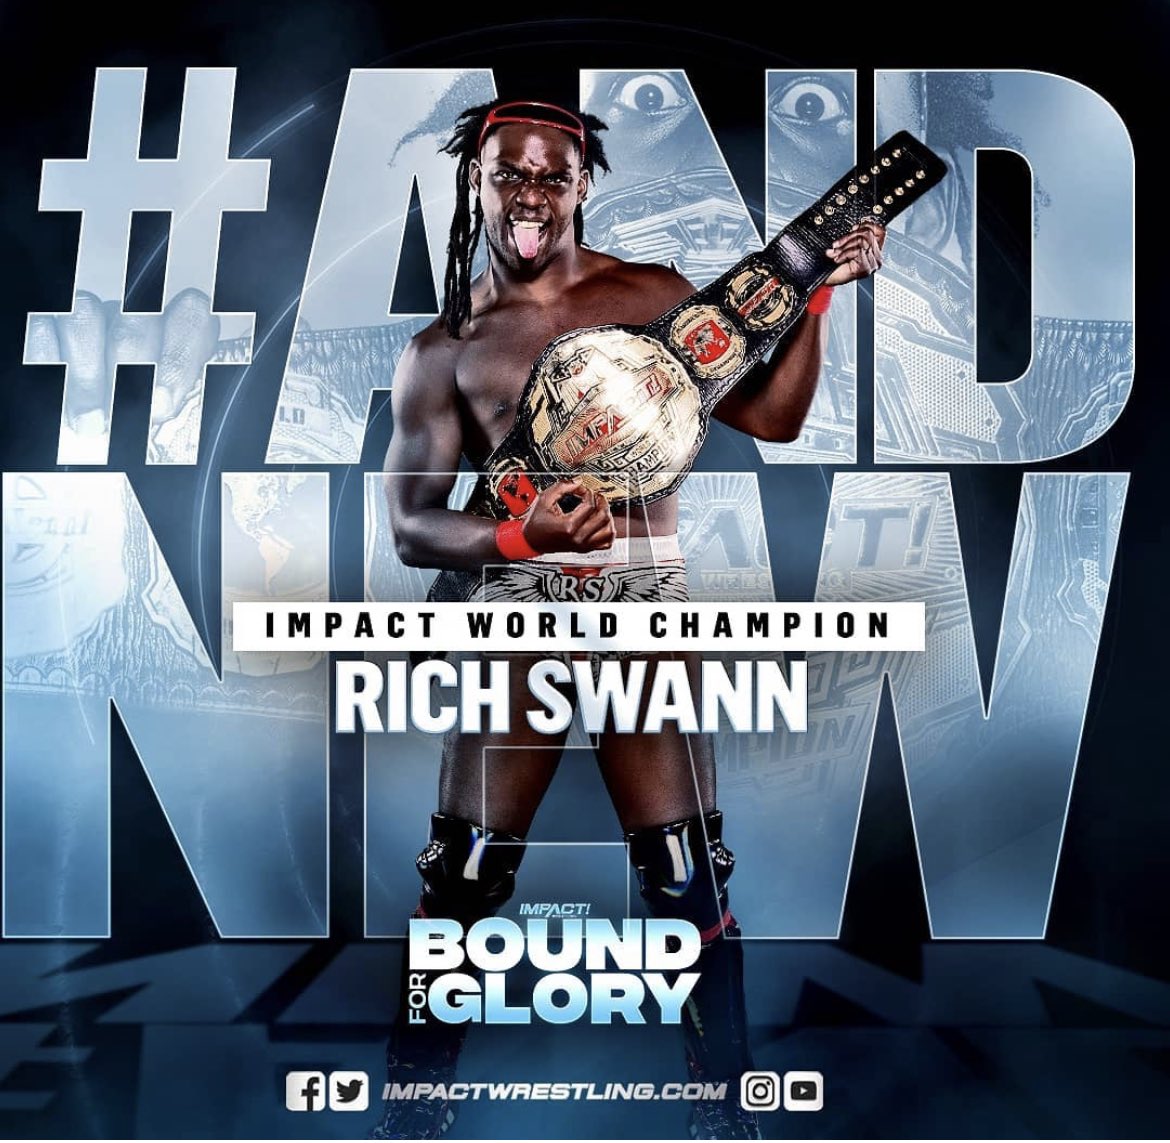 And New!!! Thoughts? #BFG2020 #BoundForGlory